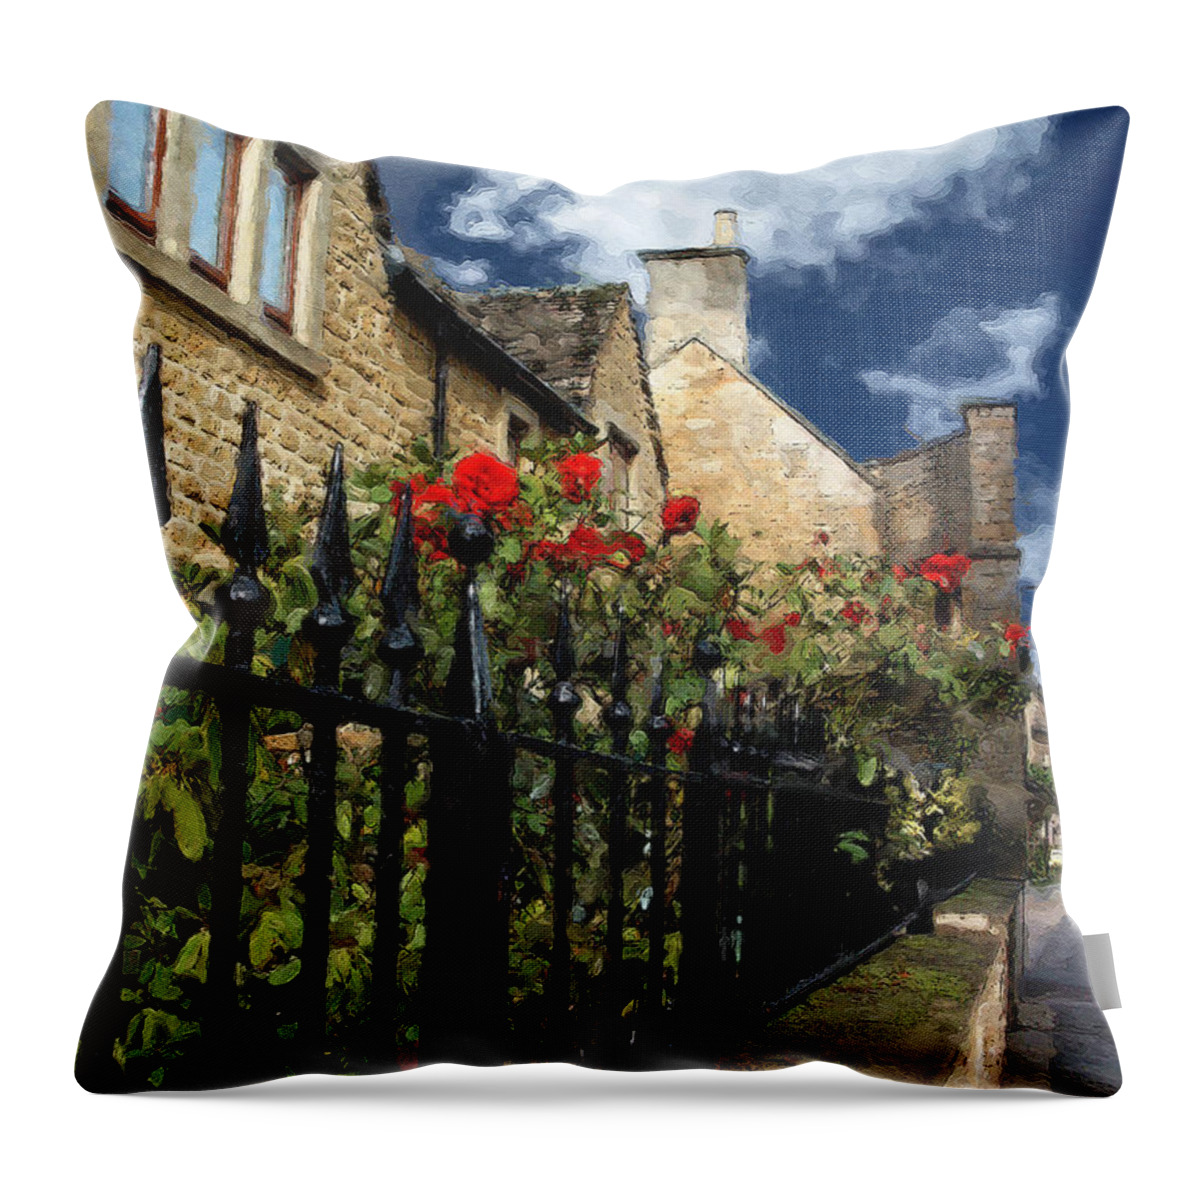 Bourton-on-the-water Throw Pillow featuring the photograph Bourton Red Roses by Brian Watt